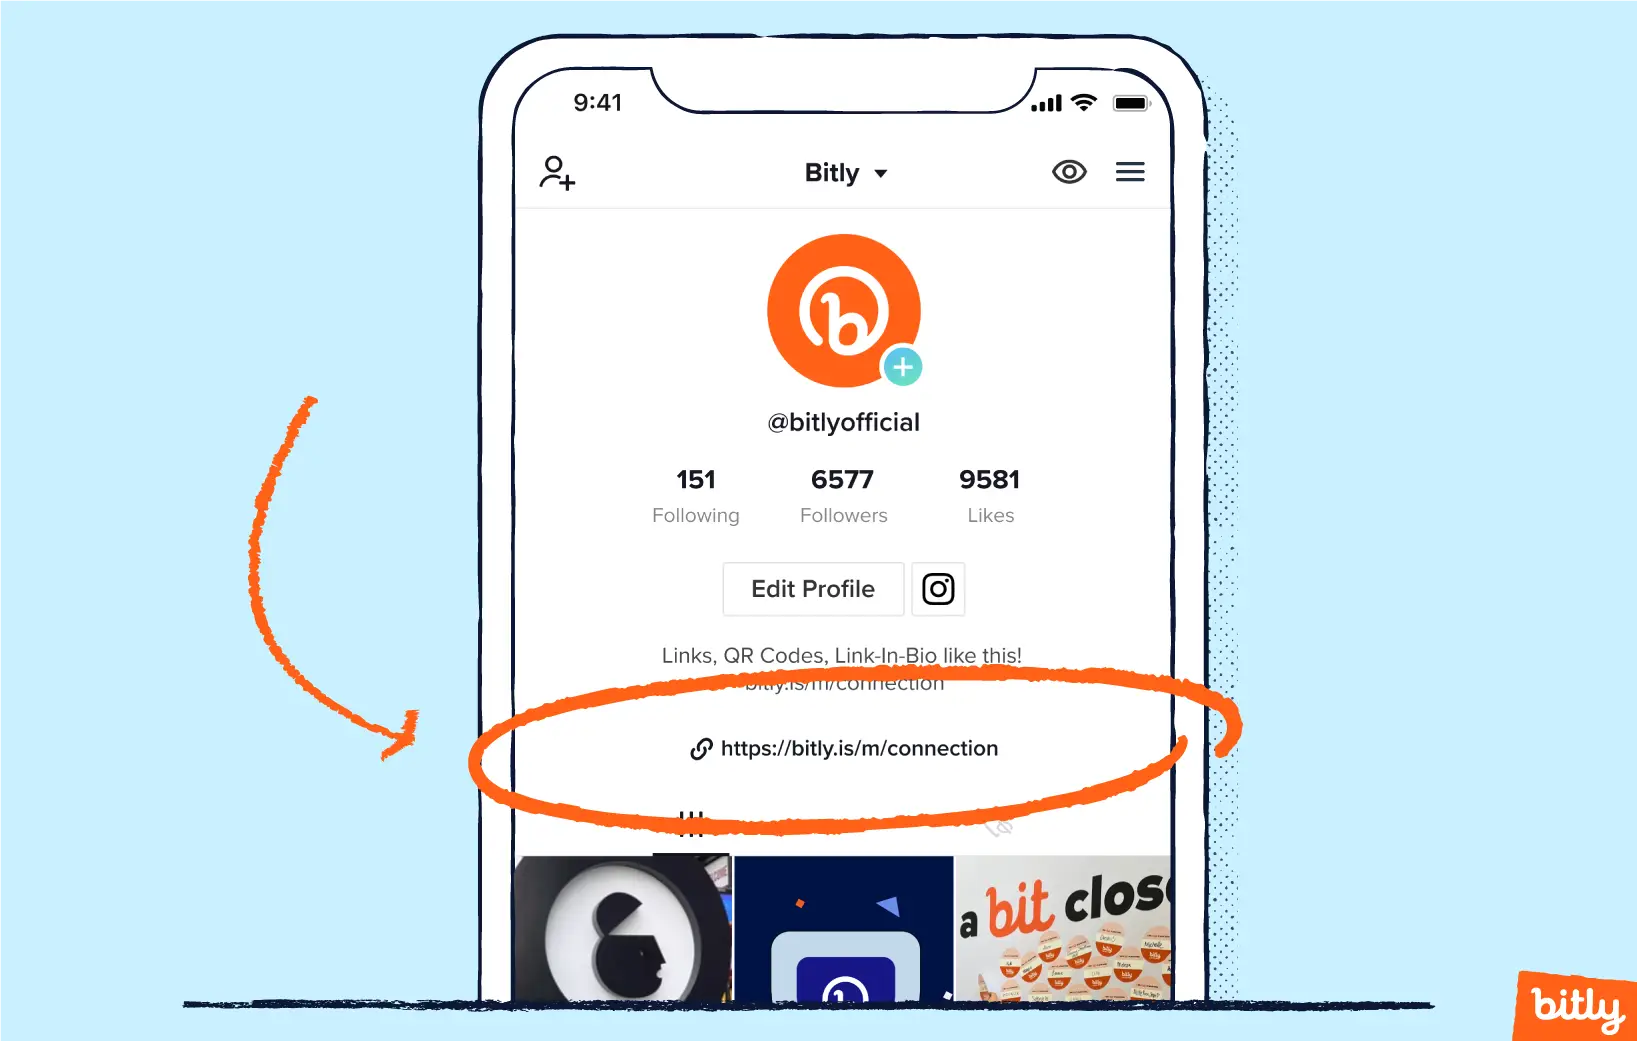 An orange arrow pointing to a Link-in-bio on Bitly's TikTok profile on a phone.